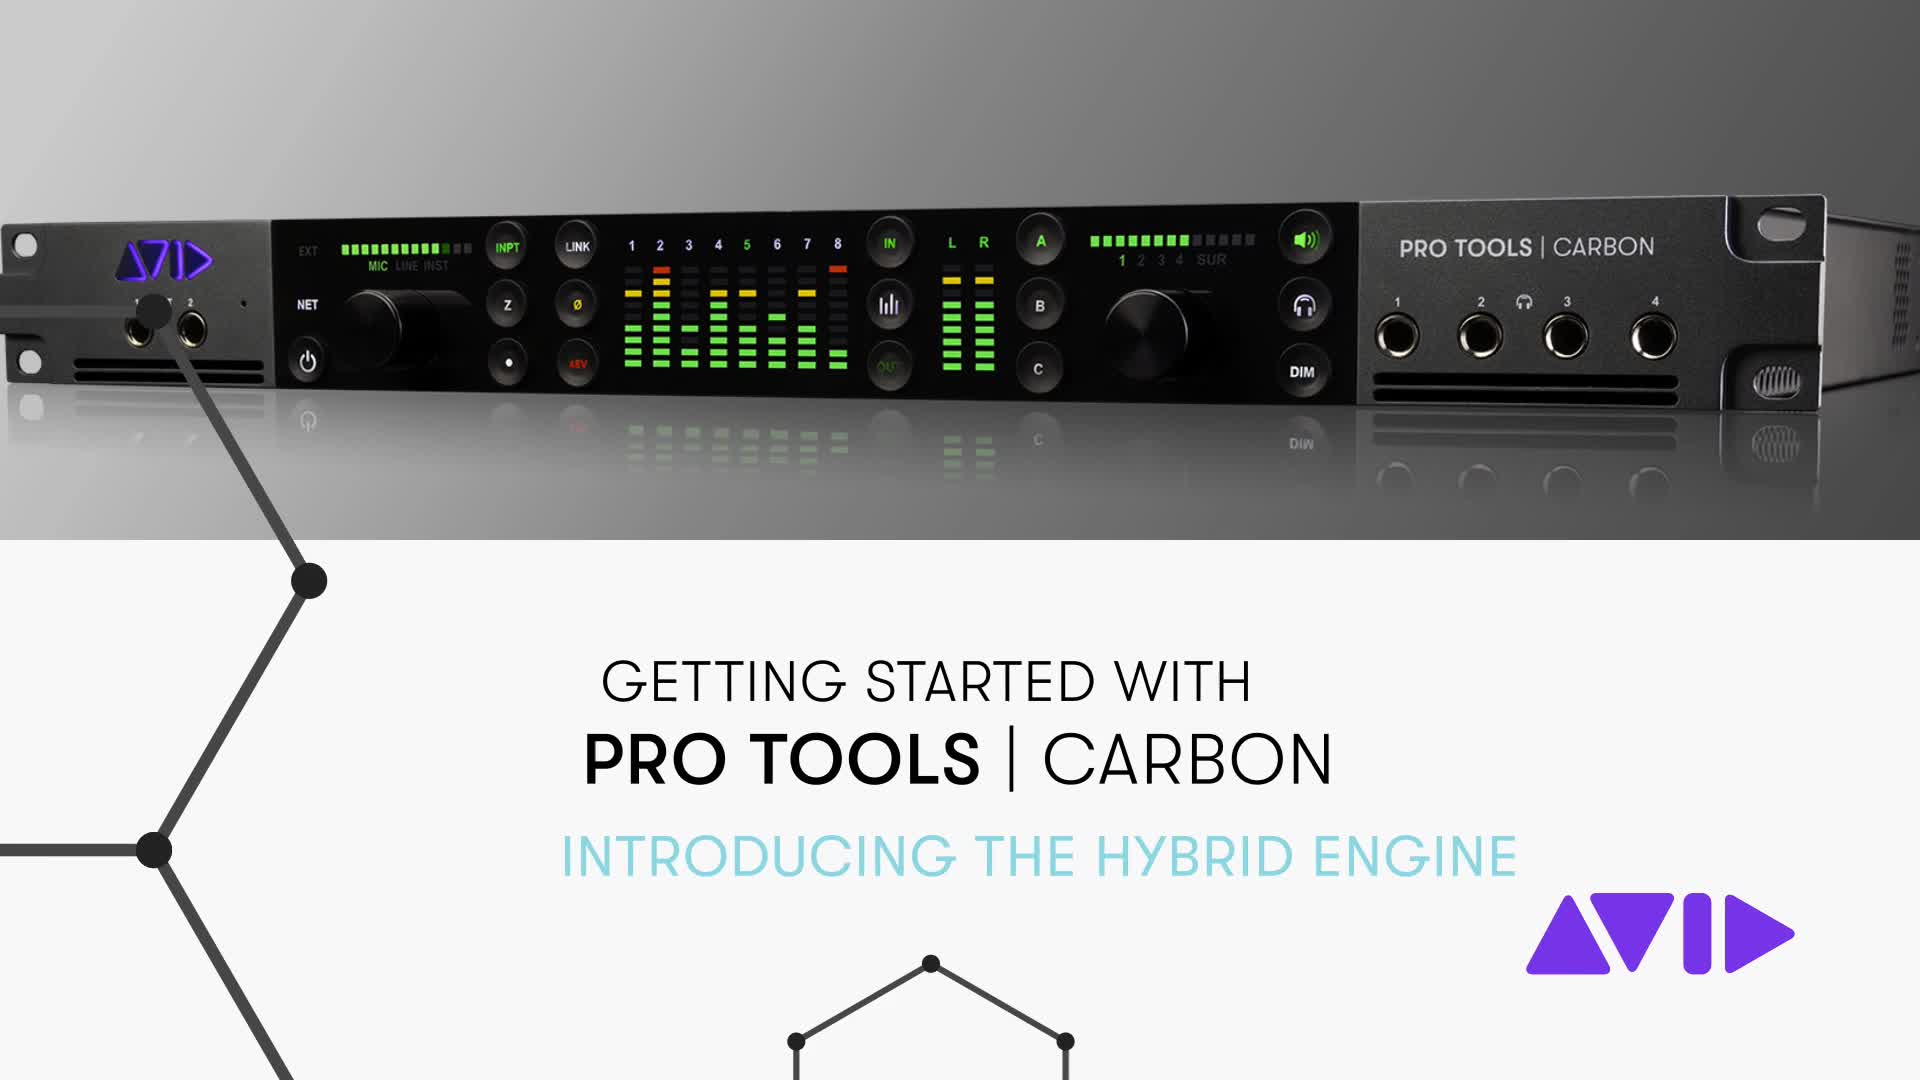 07 Pro Tools Carbon Getting Started – Introducing the Hybrid Engine